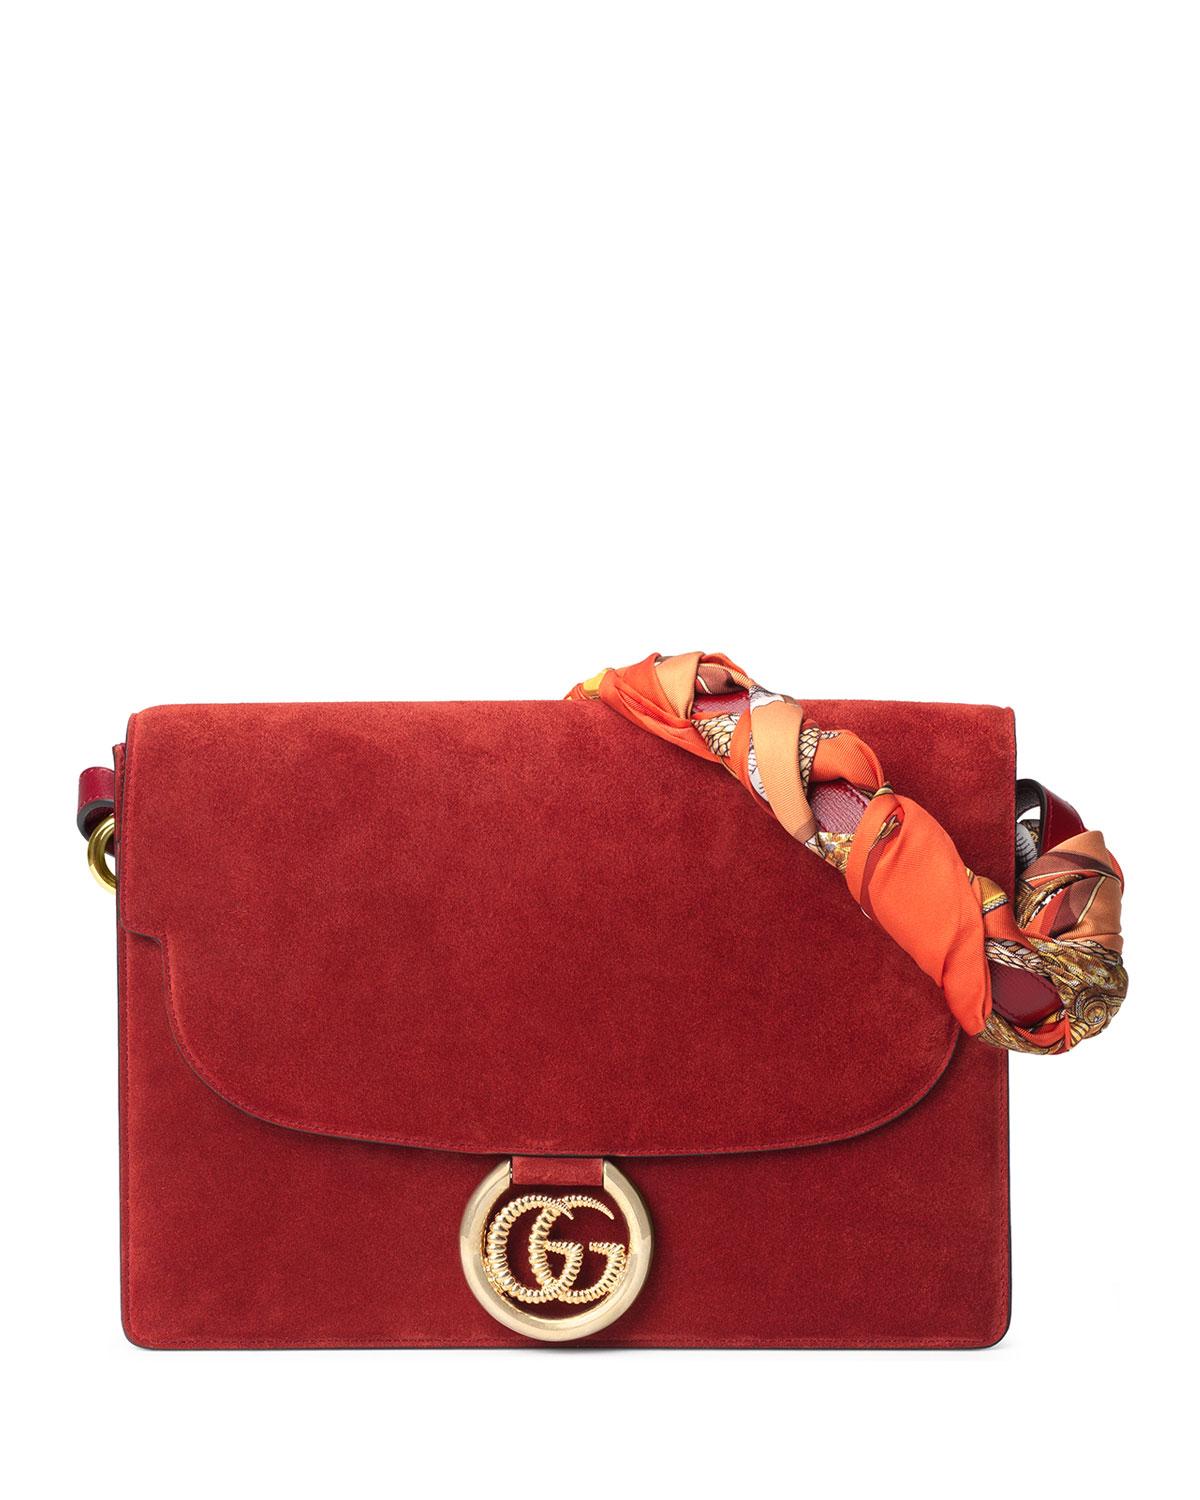 Gucci Medium Suede Shoulder Bag With Scarf in Red